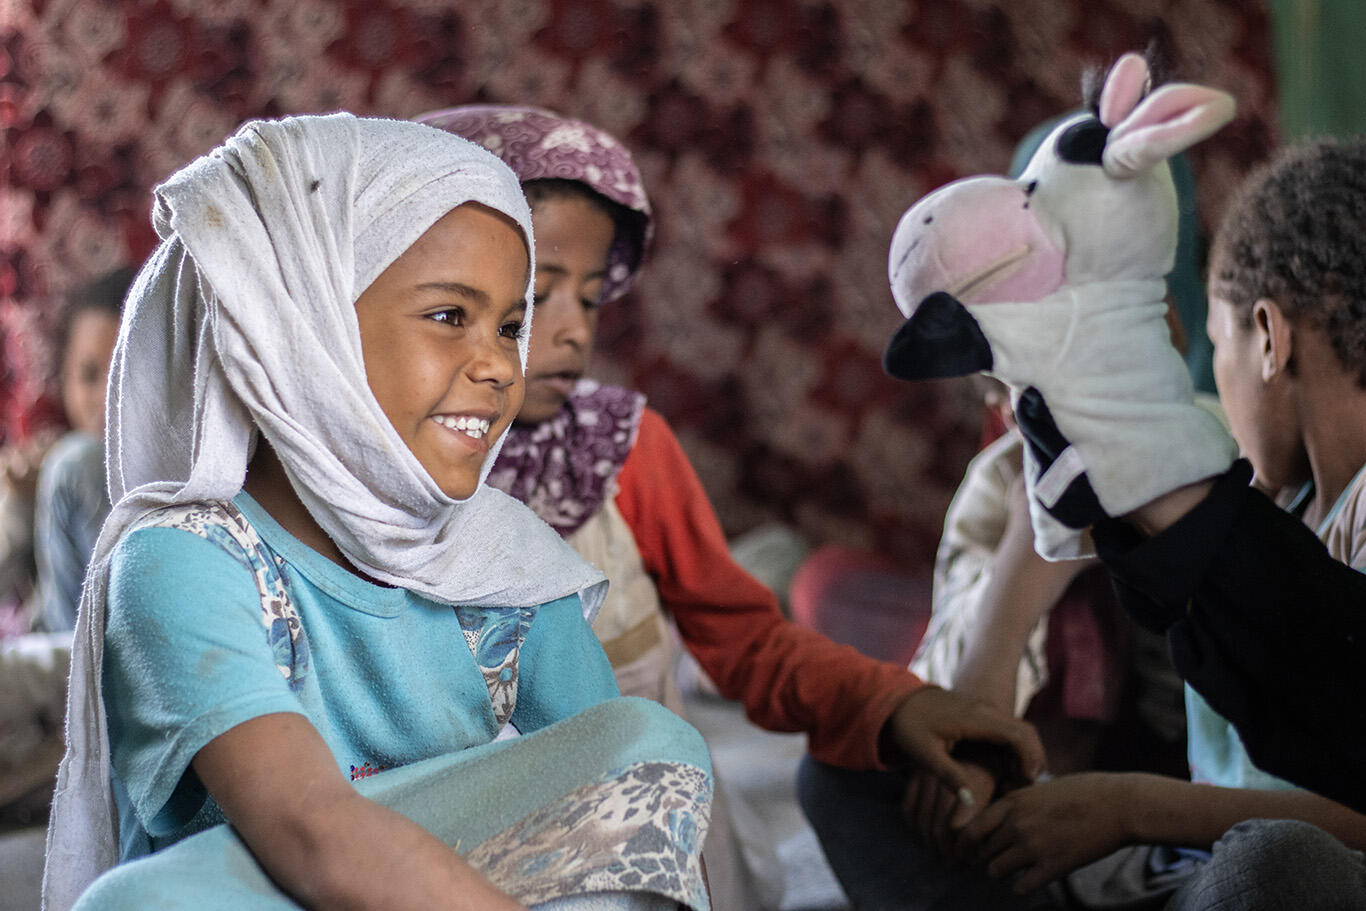 A little girl smiles and looks at a cow puppet while sitting on the ground with other children in Yemen